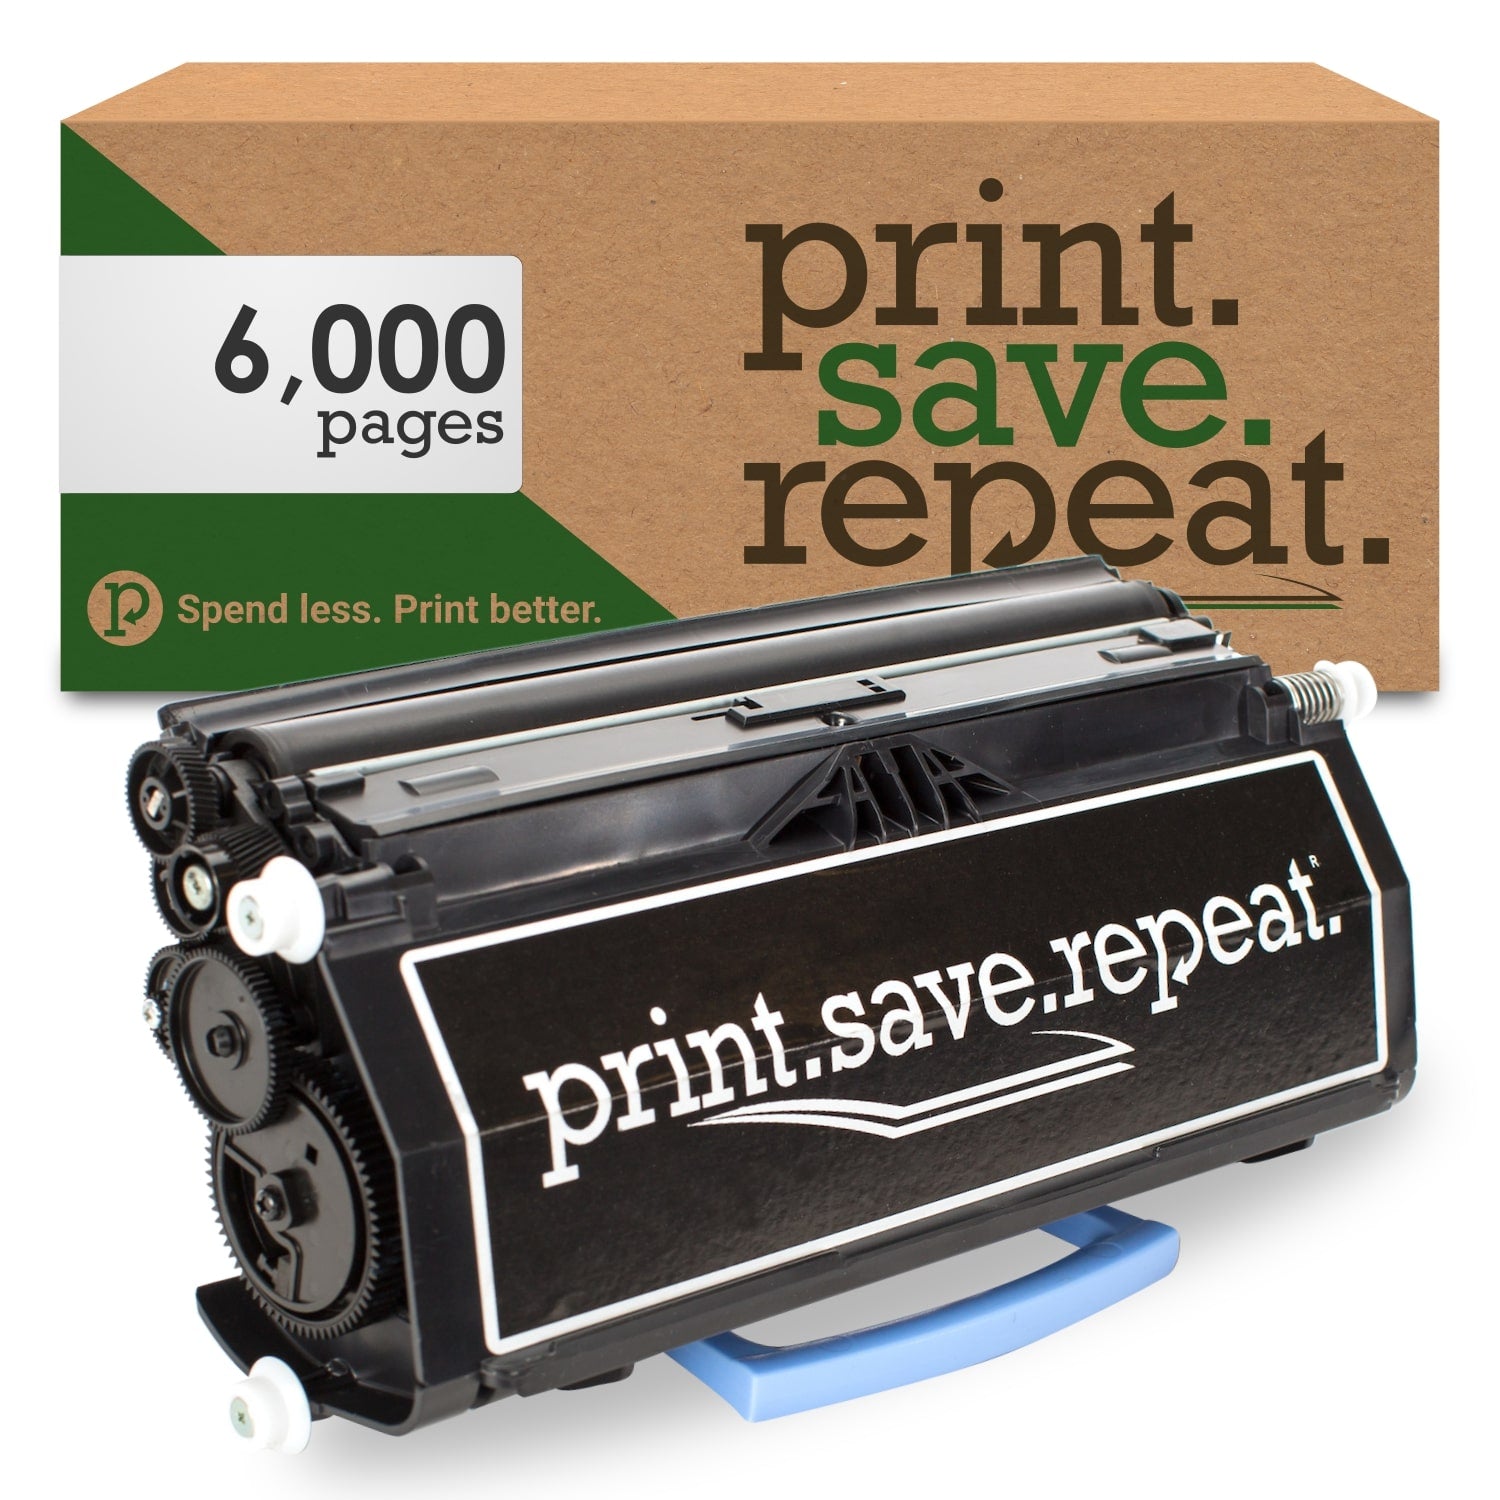 Print.Save.Repeat. Dell PK937 High Yield Remanufactured Toner Cartridge for 2330, 2350 [6,000 Pages]